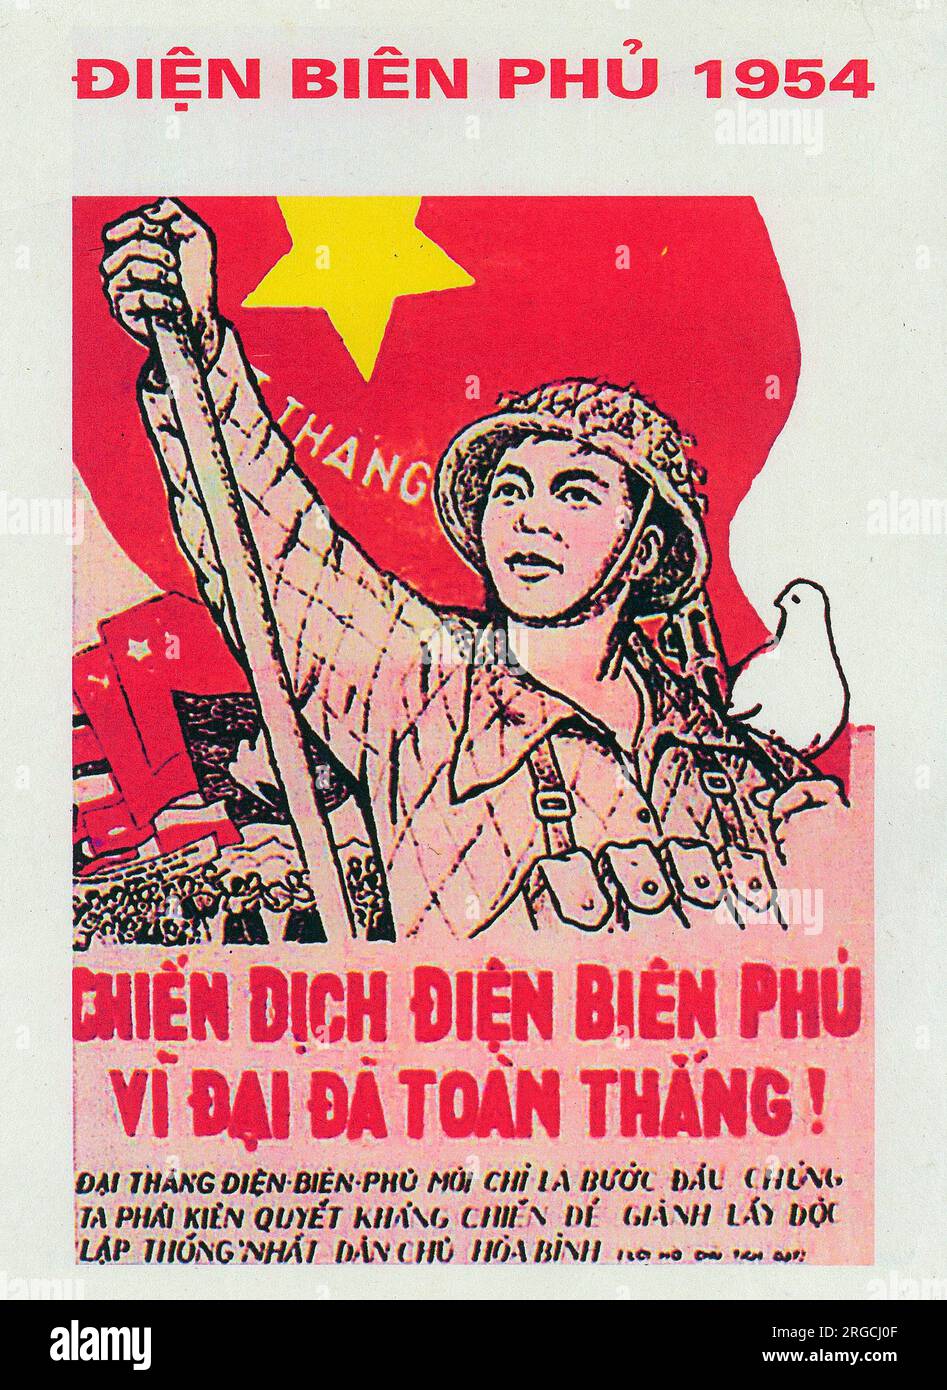 Vietnam War - Vietnamese Patriotic Poster - 'Victory and Dien Bien Phu' - defeat of the French forces in 1954 remembered as a rallying call for further success. The Battle of Dien Bien Phu was a climactic confrontation of the First Indochina War that took place between 13 March and 7 May 1954 Stock Photo